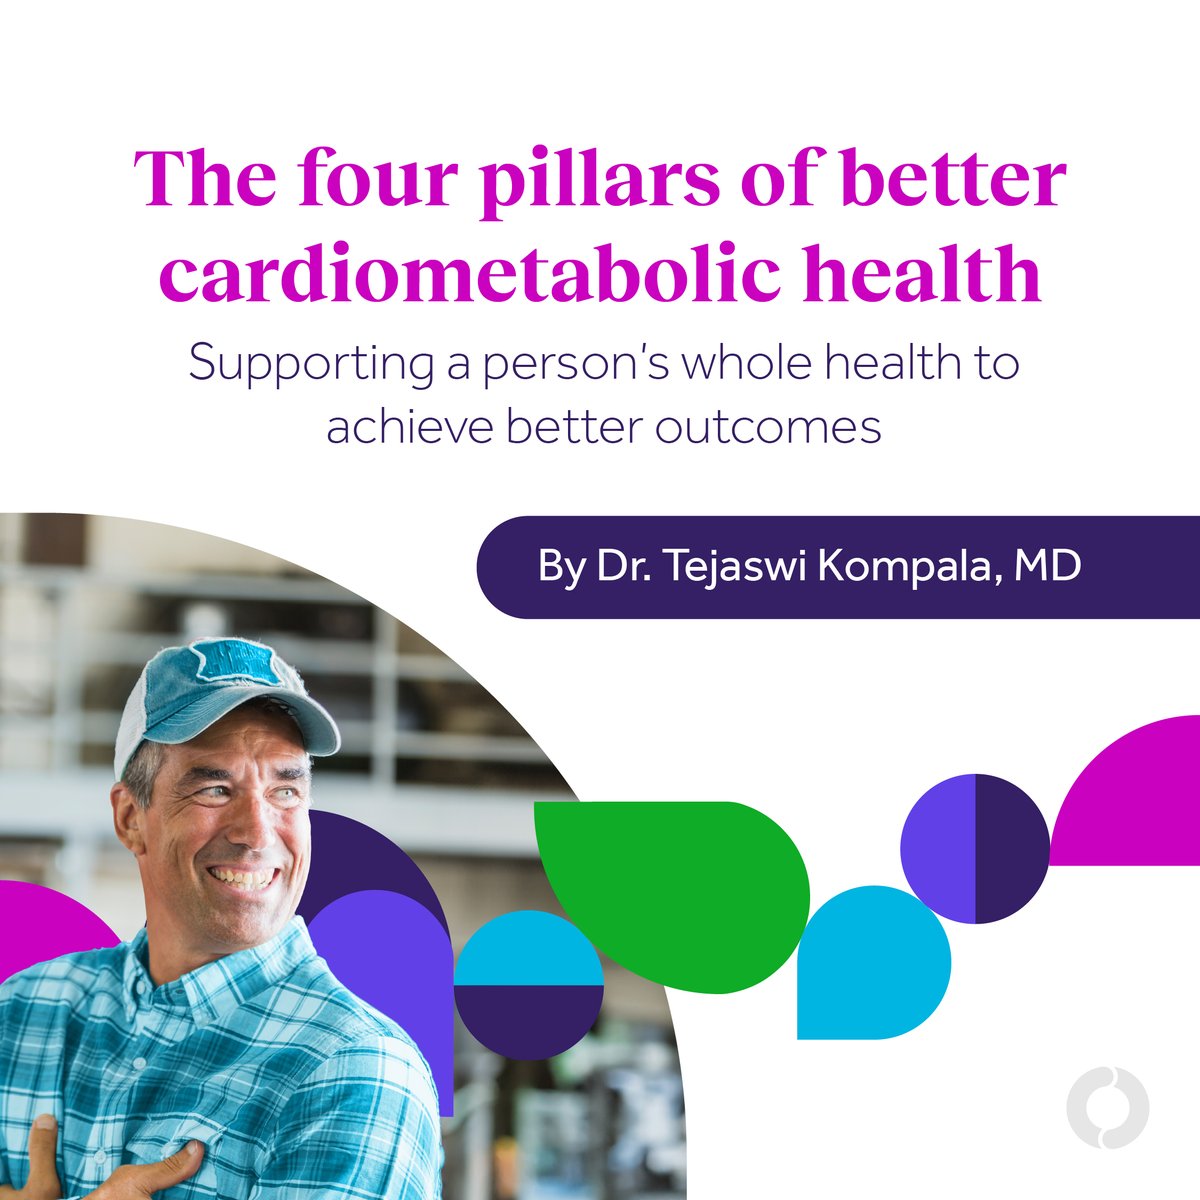 When it comes to achieving overall well-being, cardiometabolic health is key. Dr. Tejaswi Kompala explains the importance of shifting focus to improving cardiometabolic health for disease prevention and the four critical components to achieving this goal. teladochealth.com/organizations/…